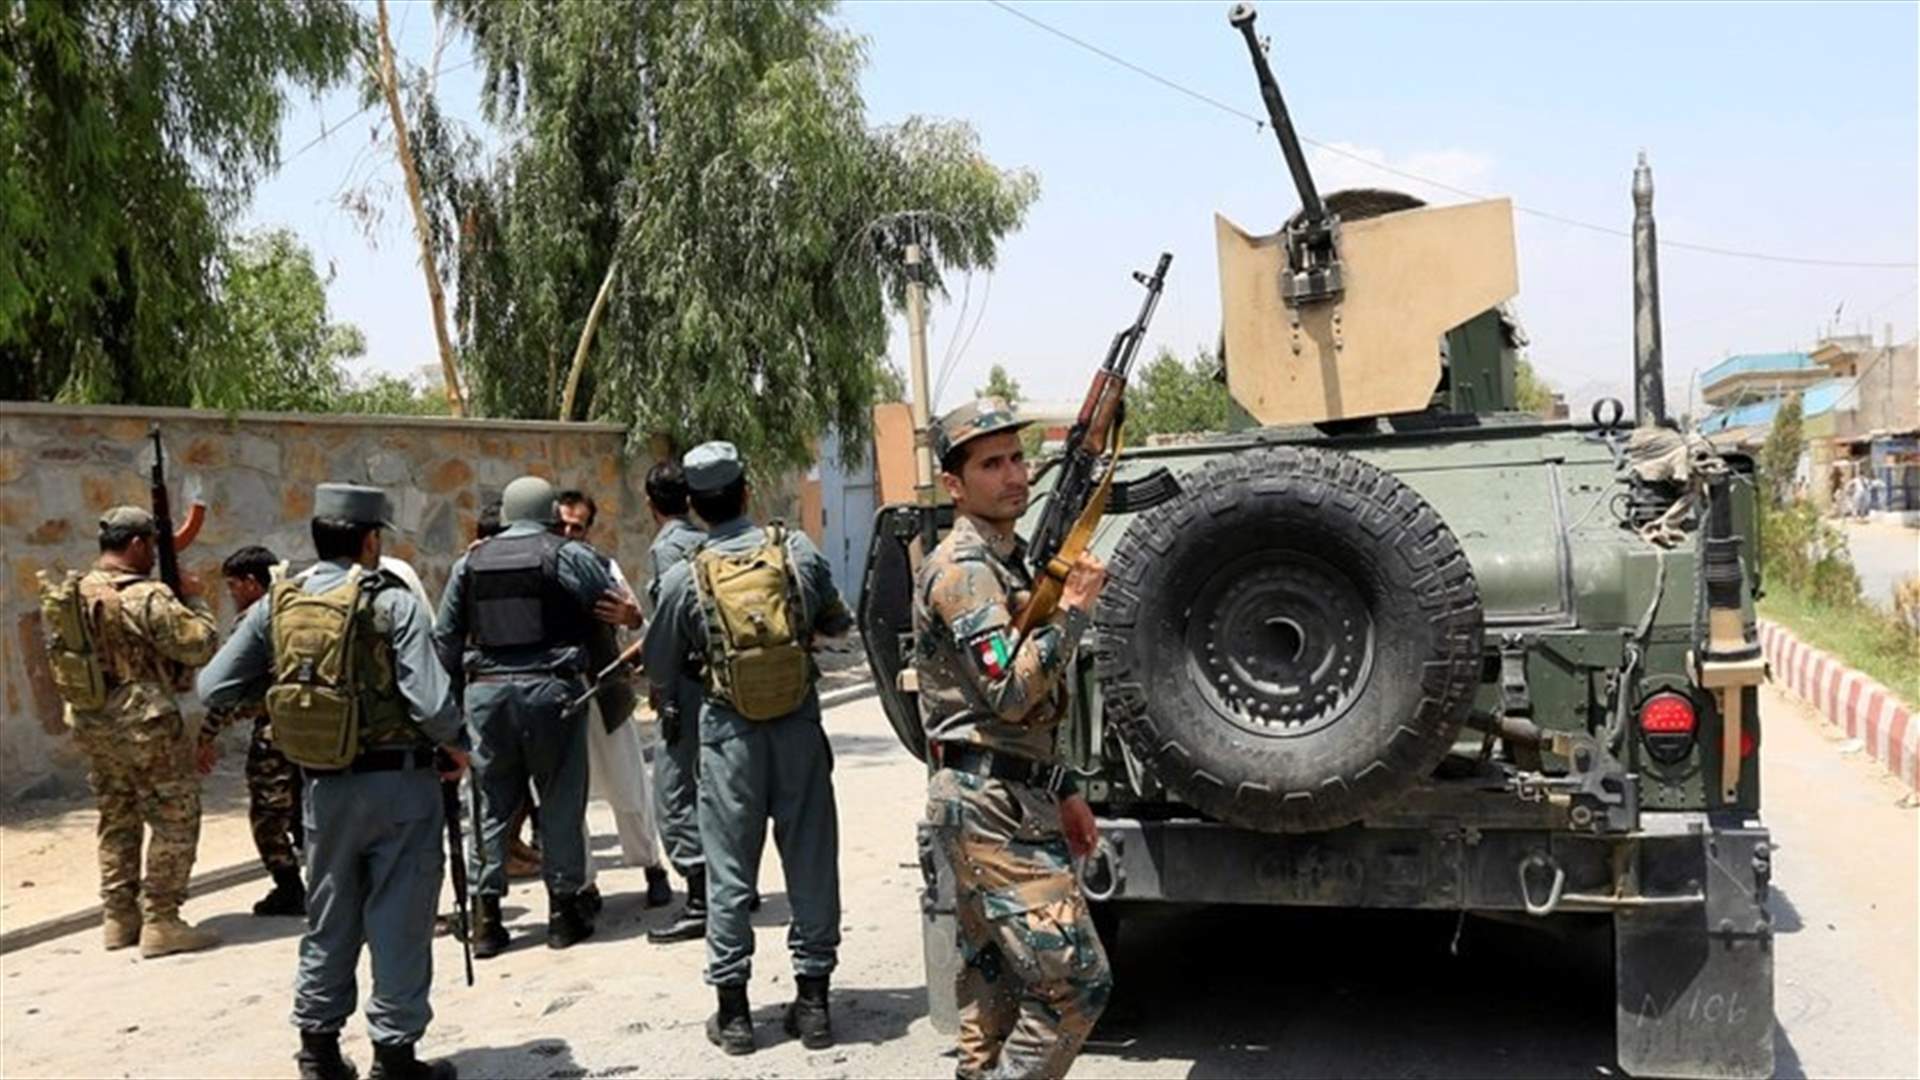 Suicide bomber, gunmen attack government building in eastern Afghanistan -officials